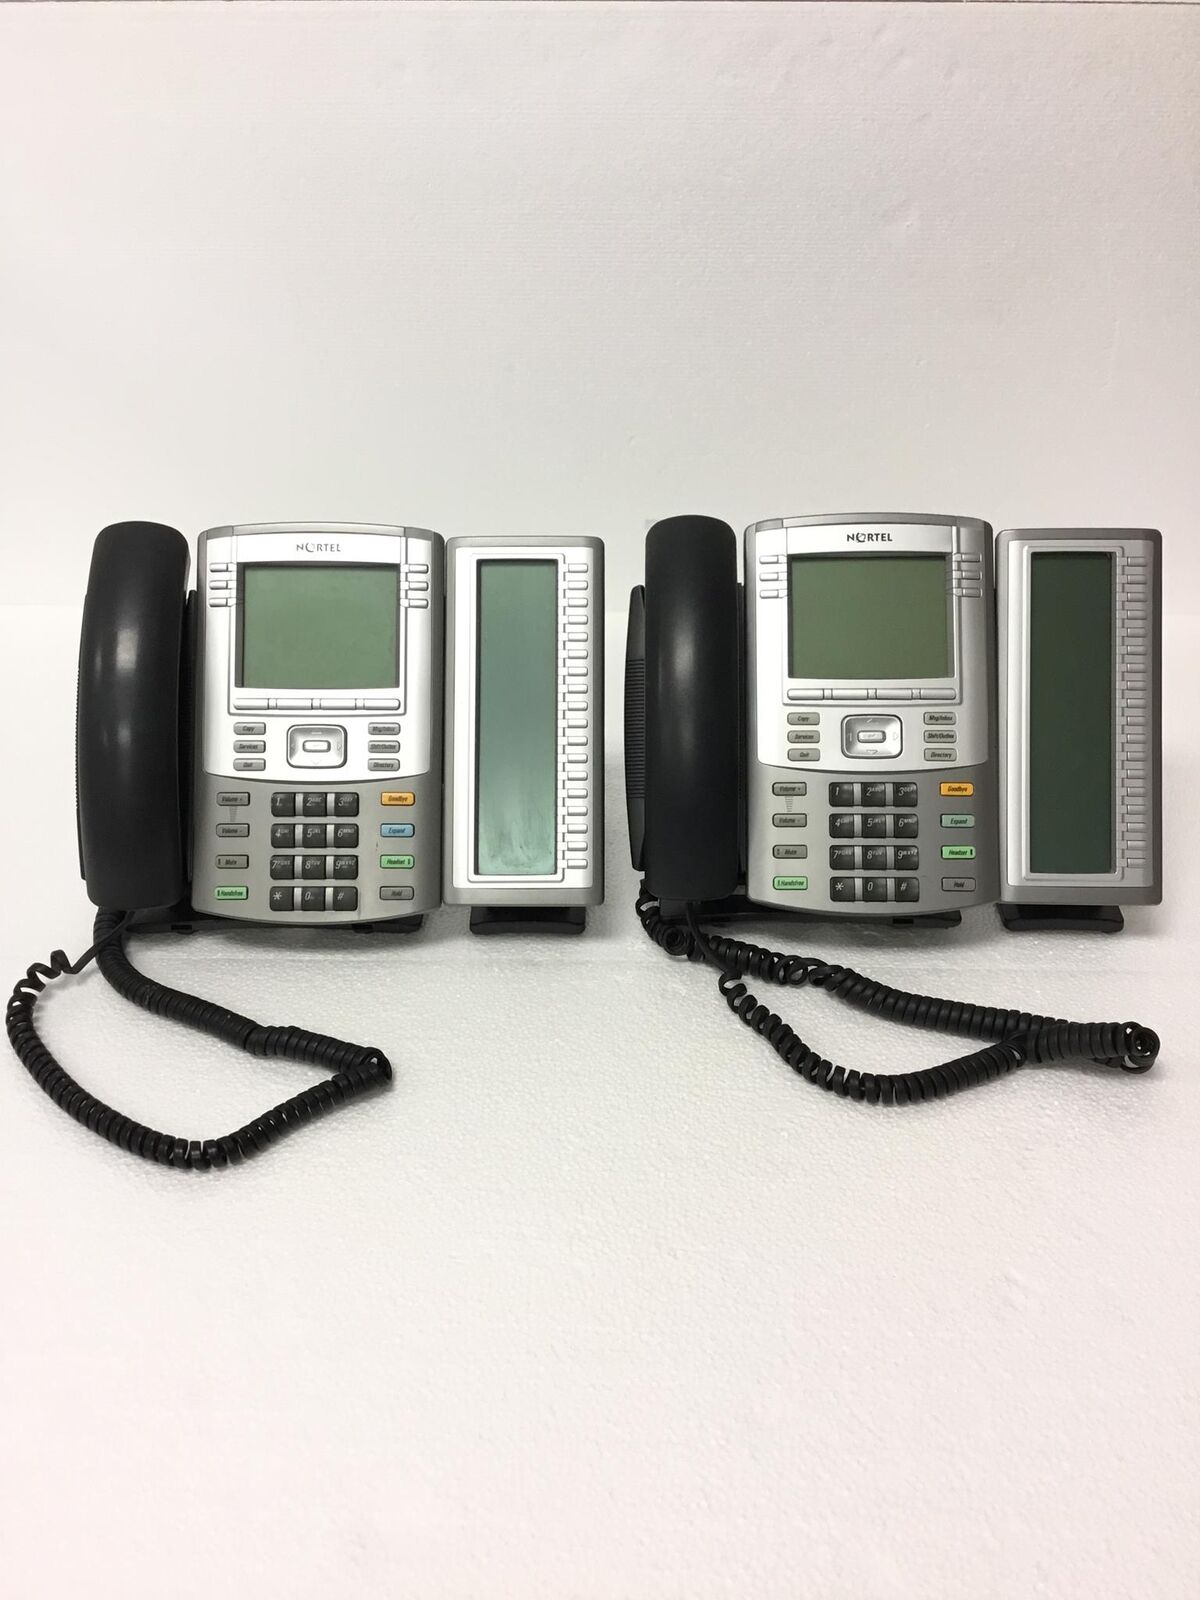 LOT OF 2 NORTEL VOIP Business Phone 1140E phones with Expansion Module NTYS08